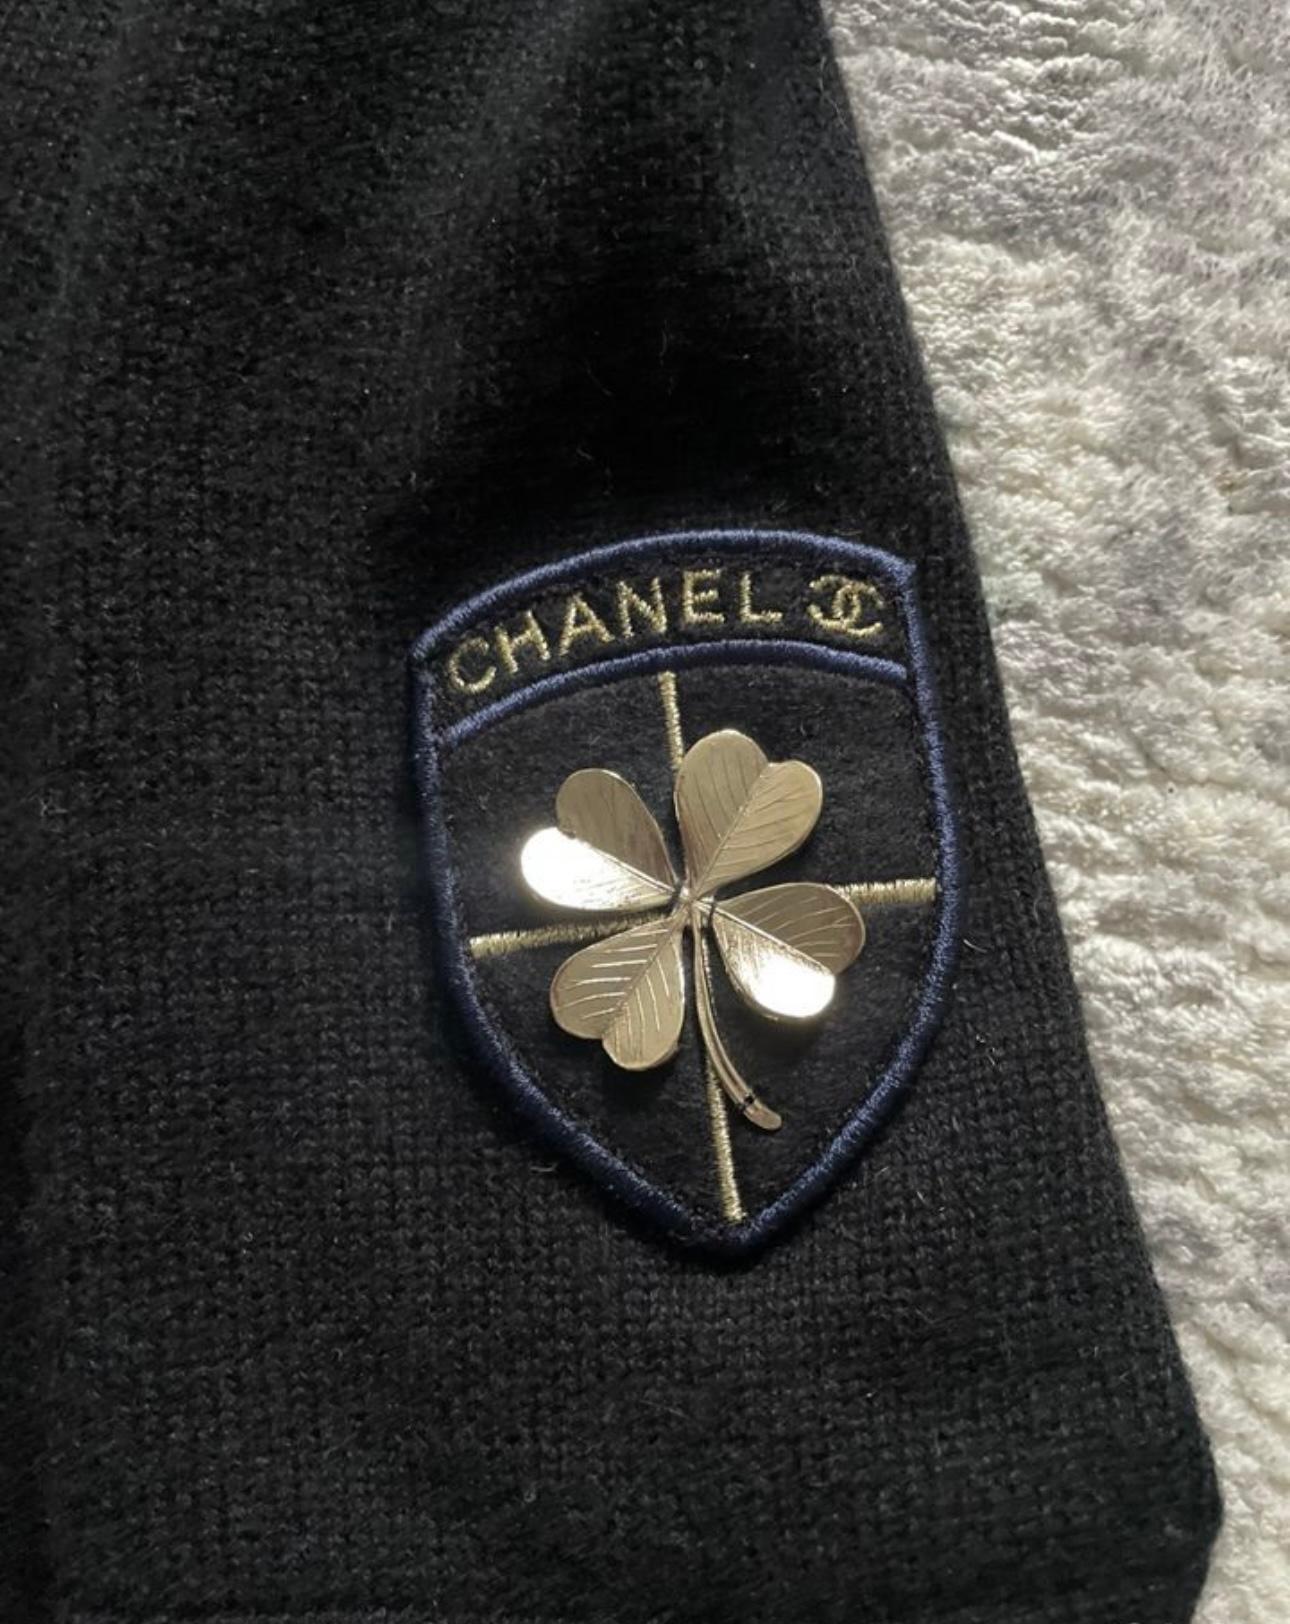 Chanel black cashmere dress with CC Lucky Clover Patch.
- CC logo buttons at pockets
Size mark 46 FR. Condition is pristine.